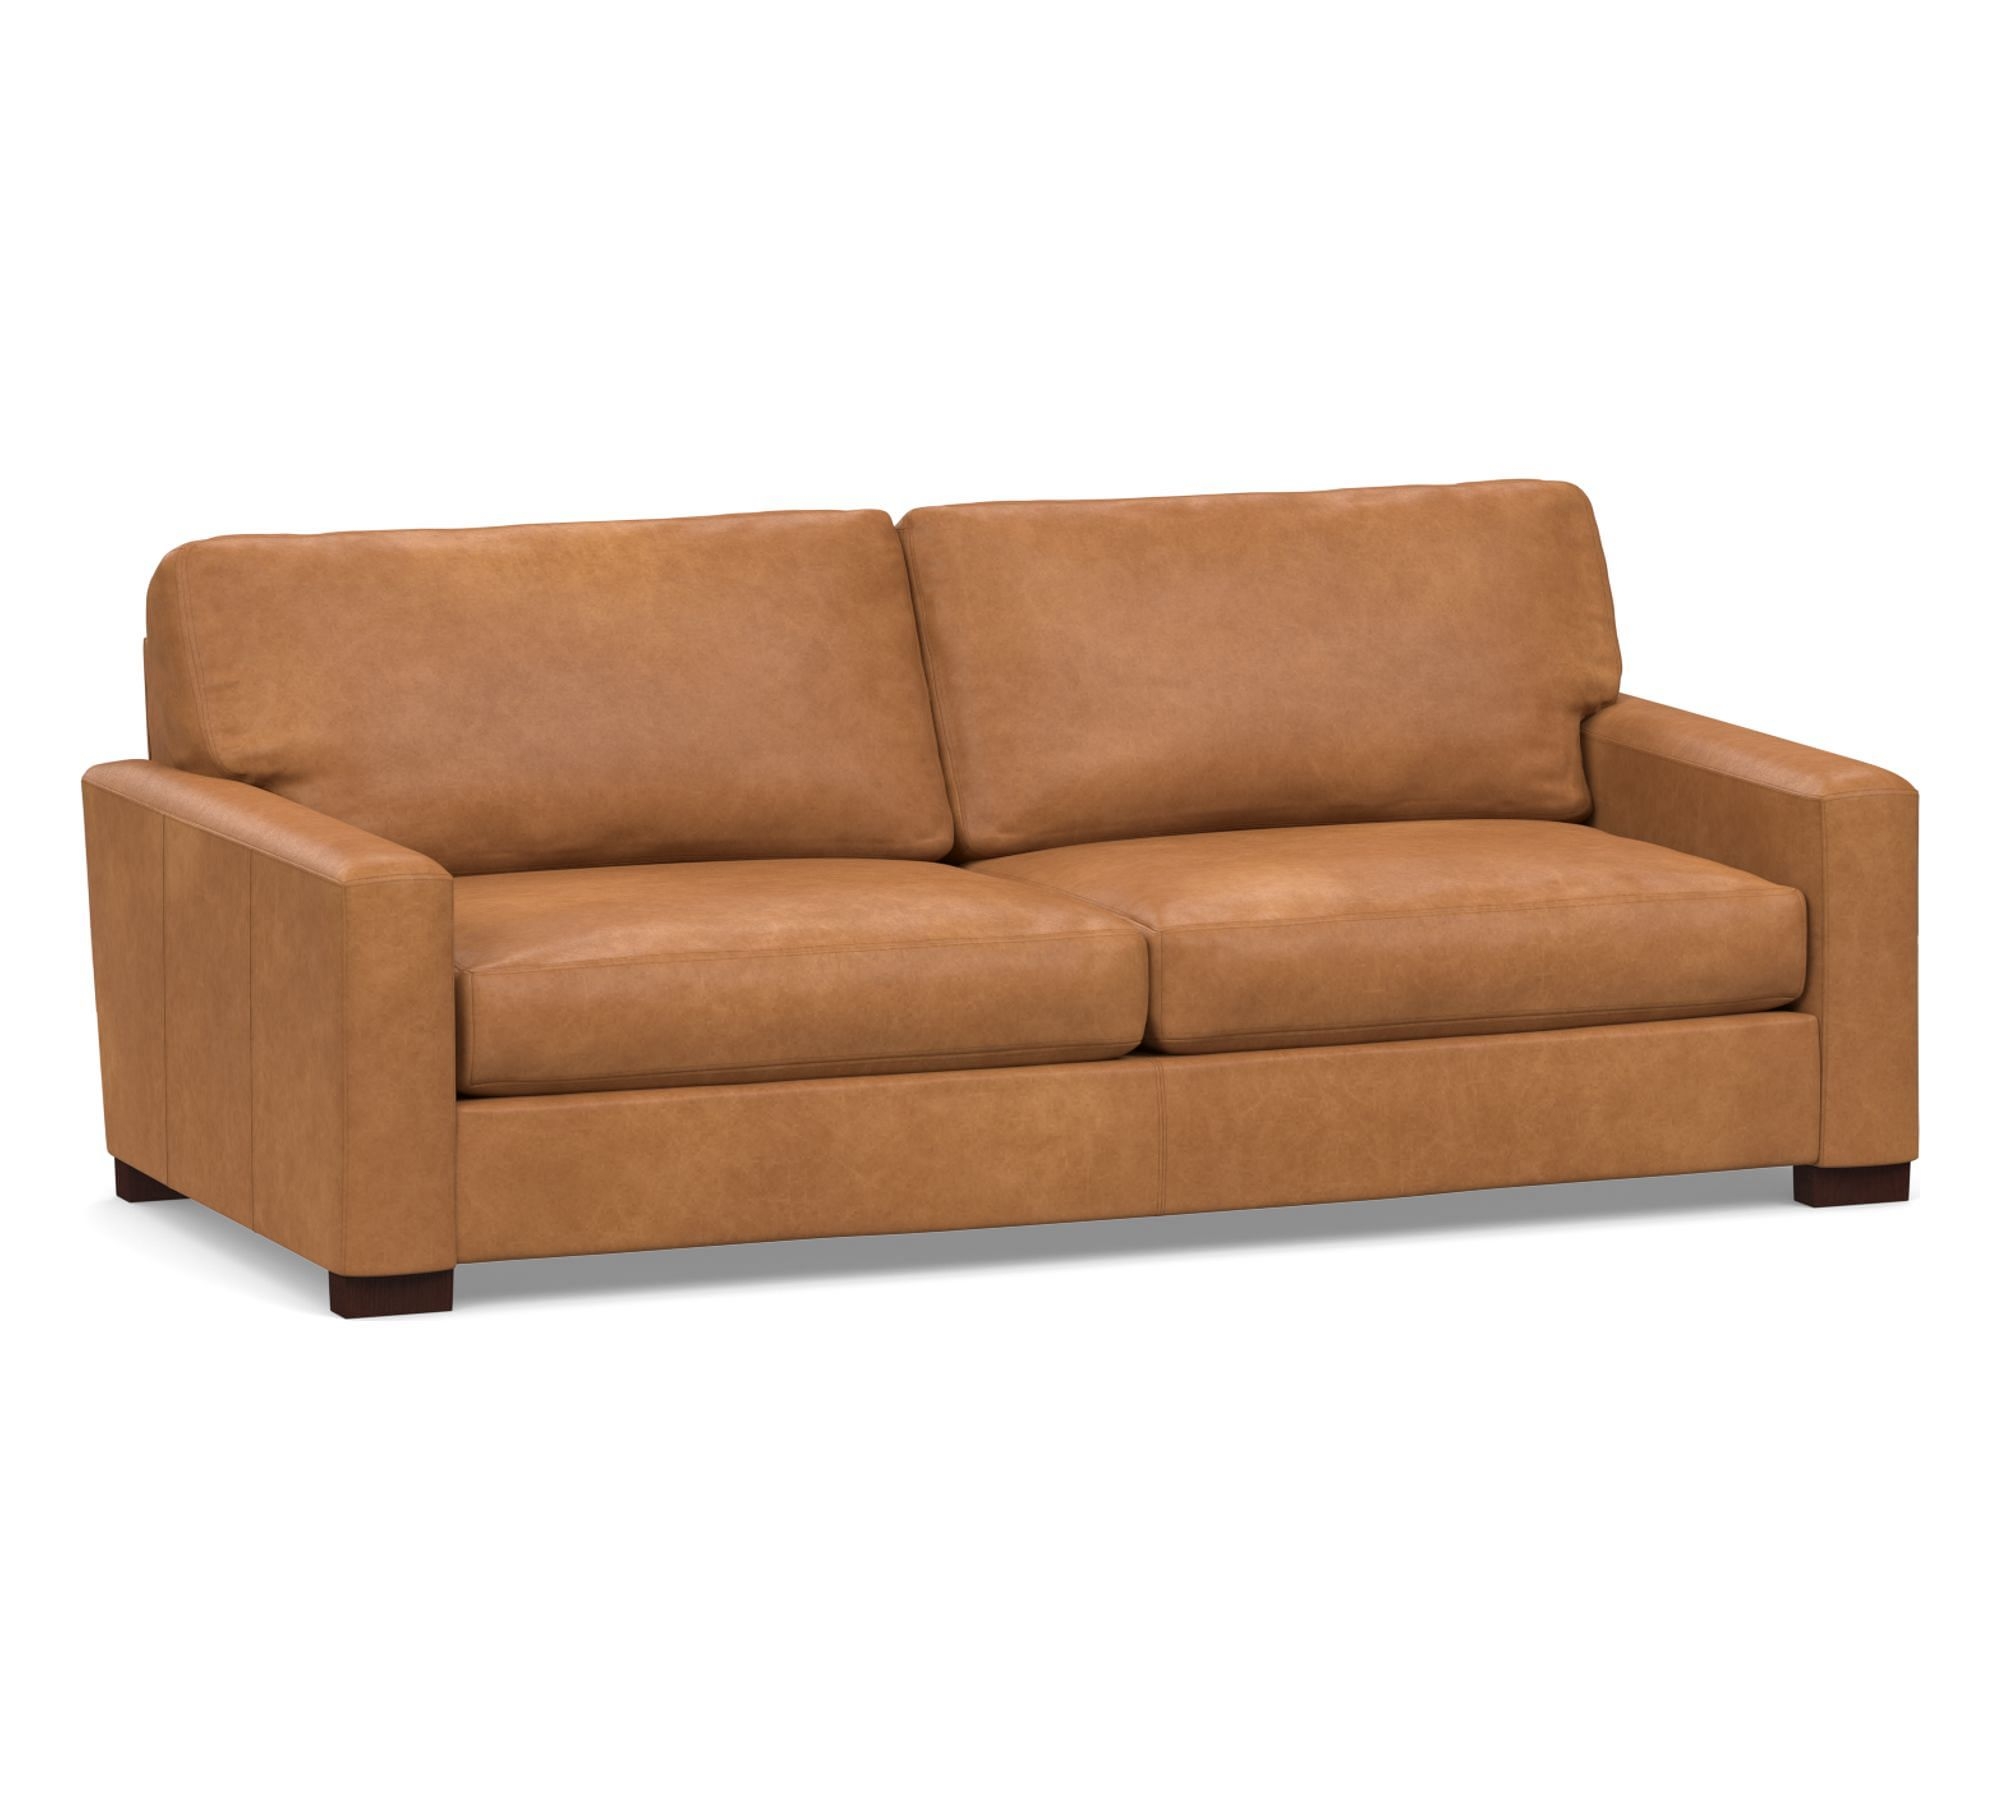 Turner Square Arm Leather Sofa 2-Seater 85.5", Down Blend Wrapped Cushions, Churchfield Camel - Image 0